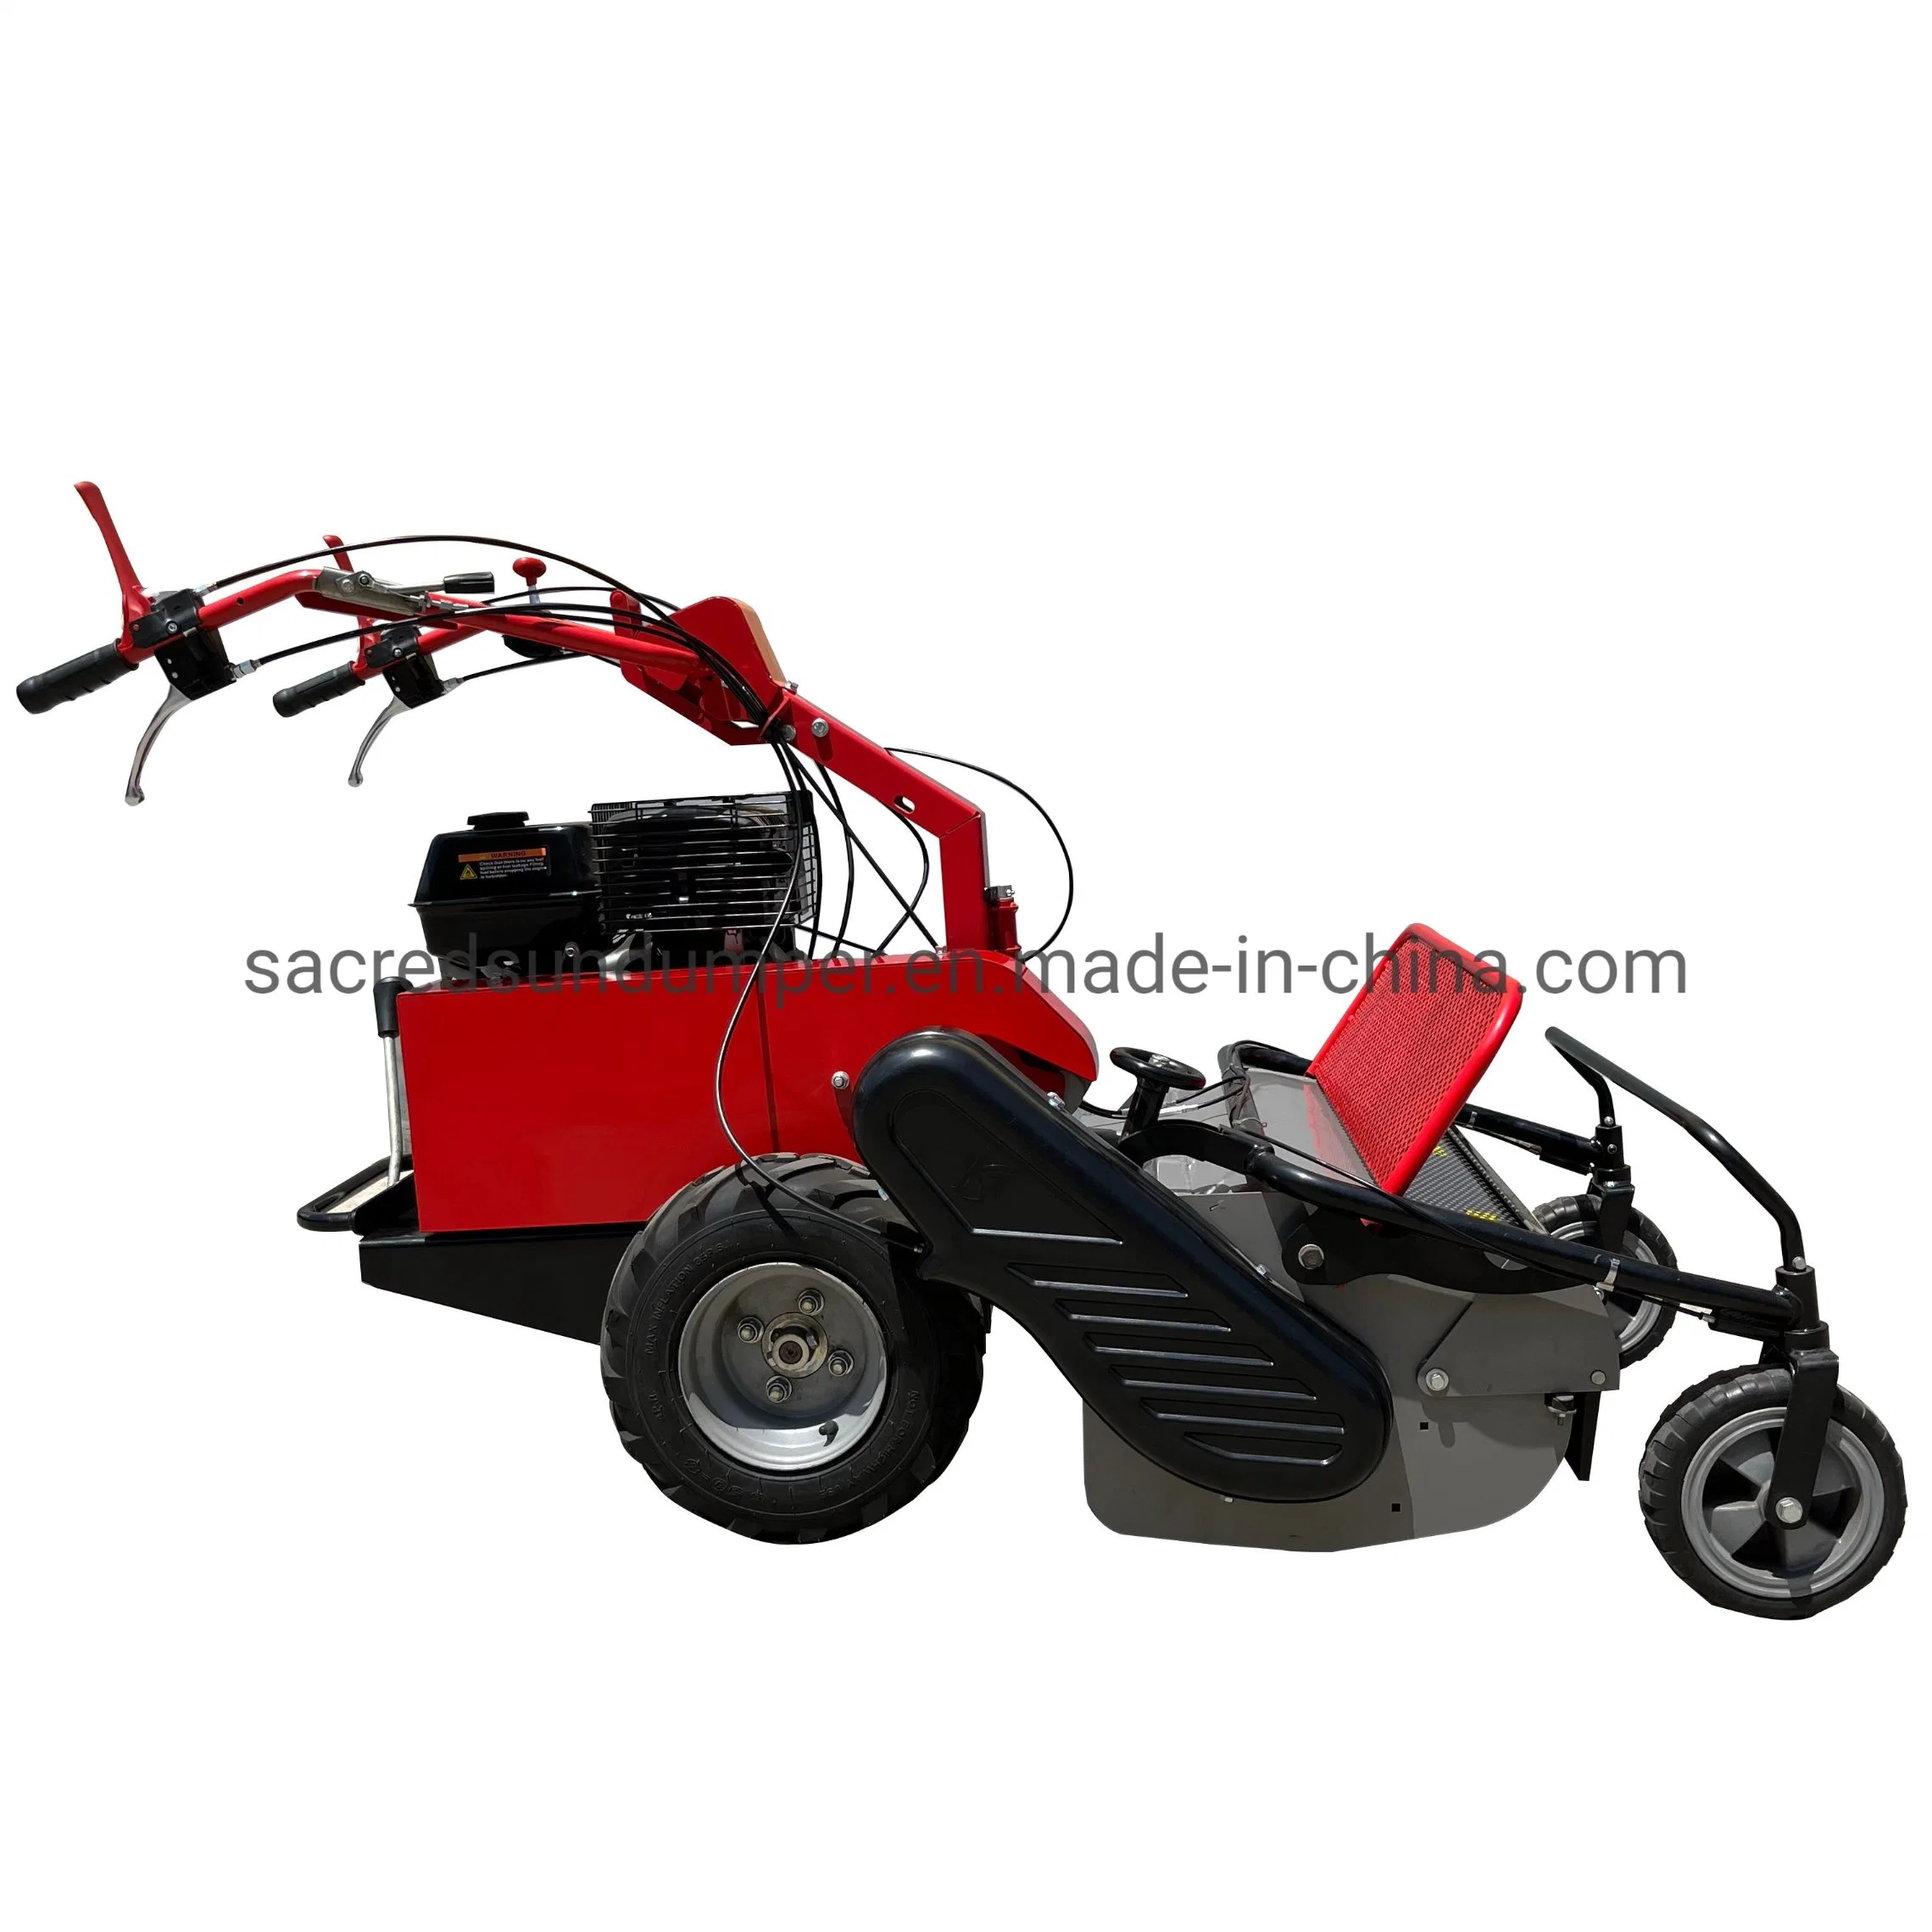 Function Grass Cutter with 13HP Engine Lawn Mower